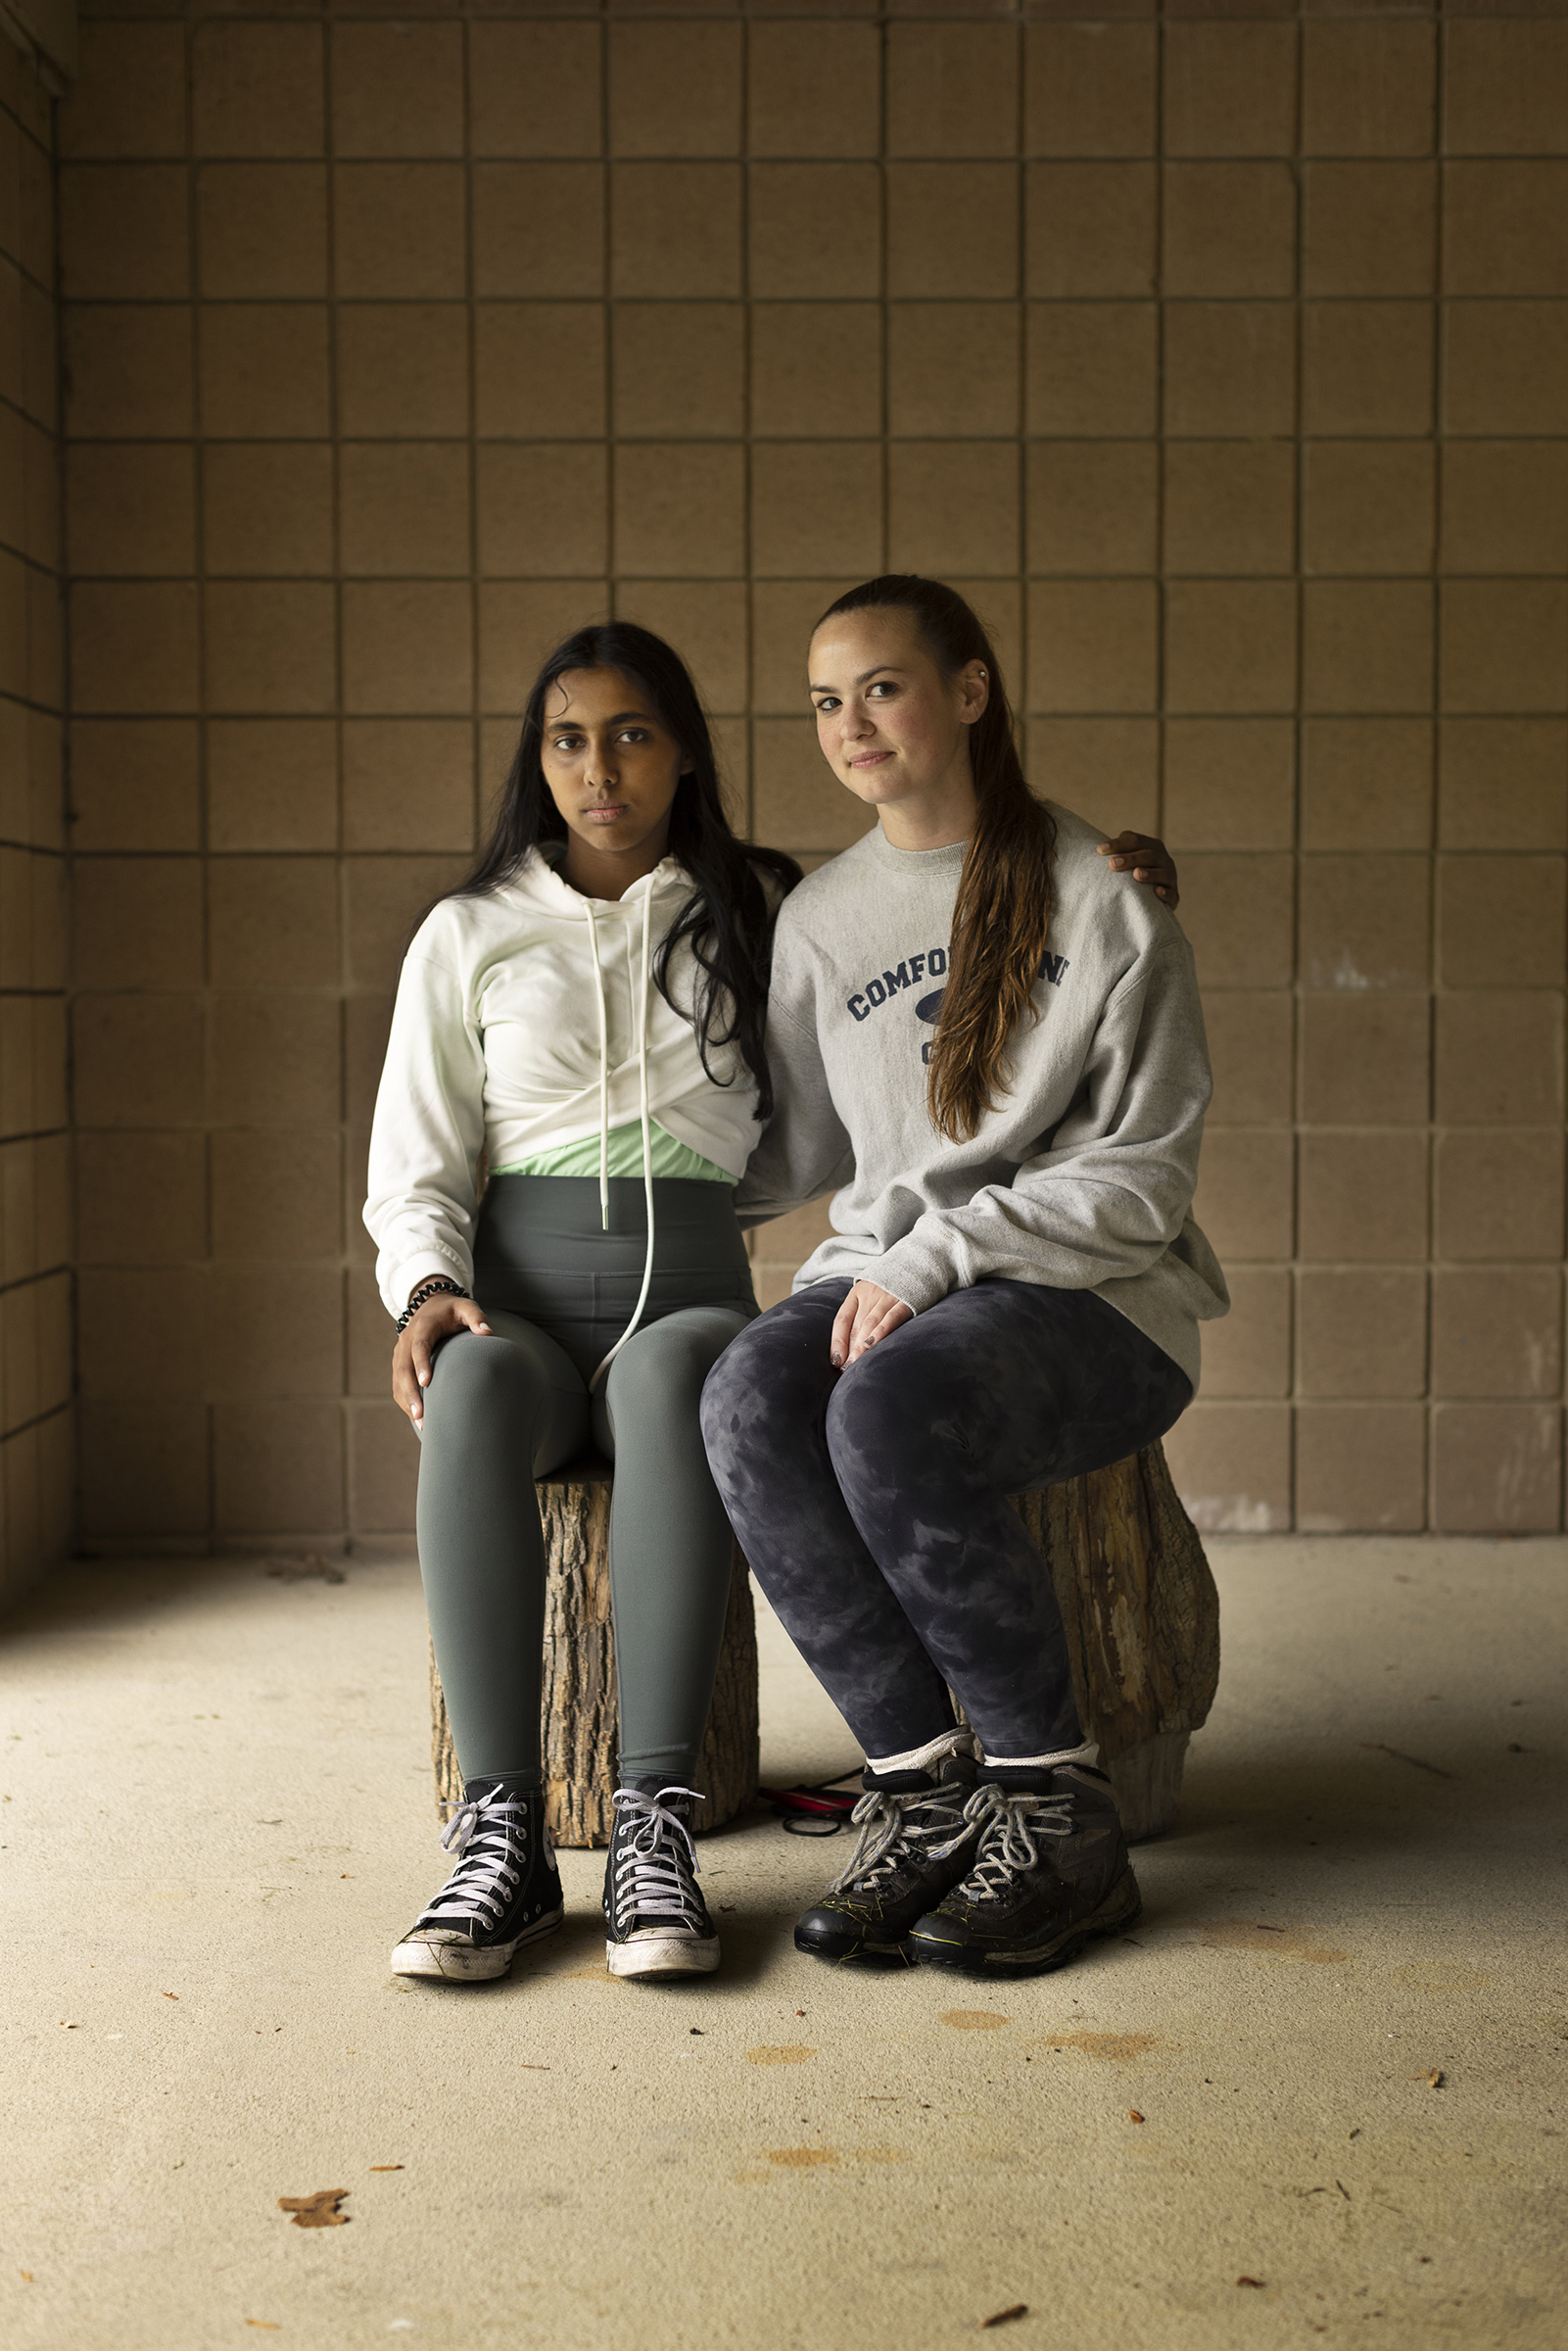 Camper Saanvi Kulkarni, left, with her buddy Kelly Nilsen in front of the gym.